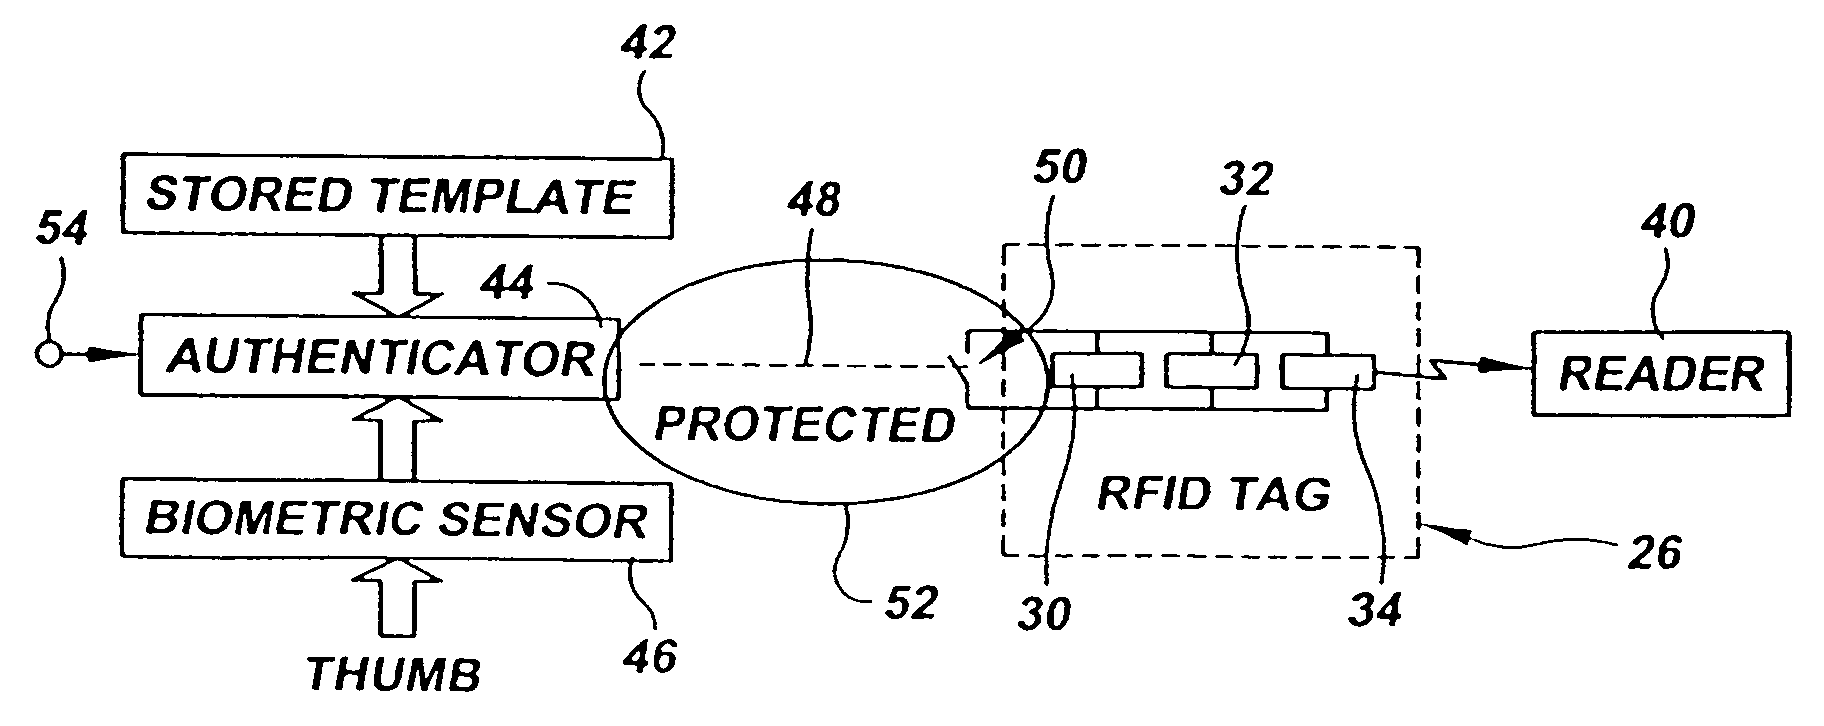 Biometrically authenticated portable access device